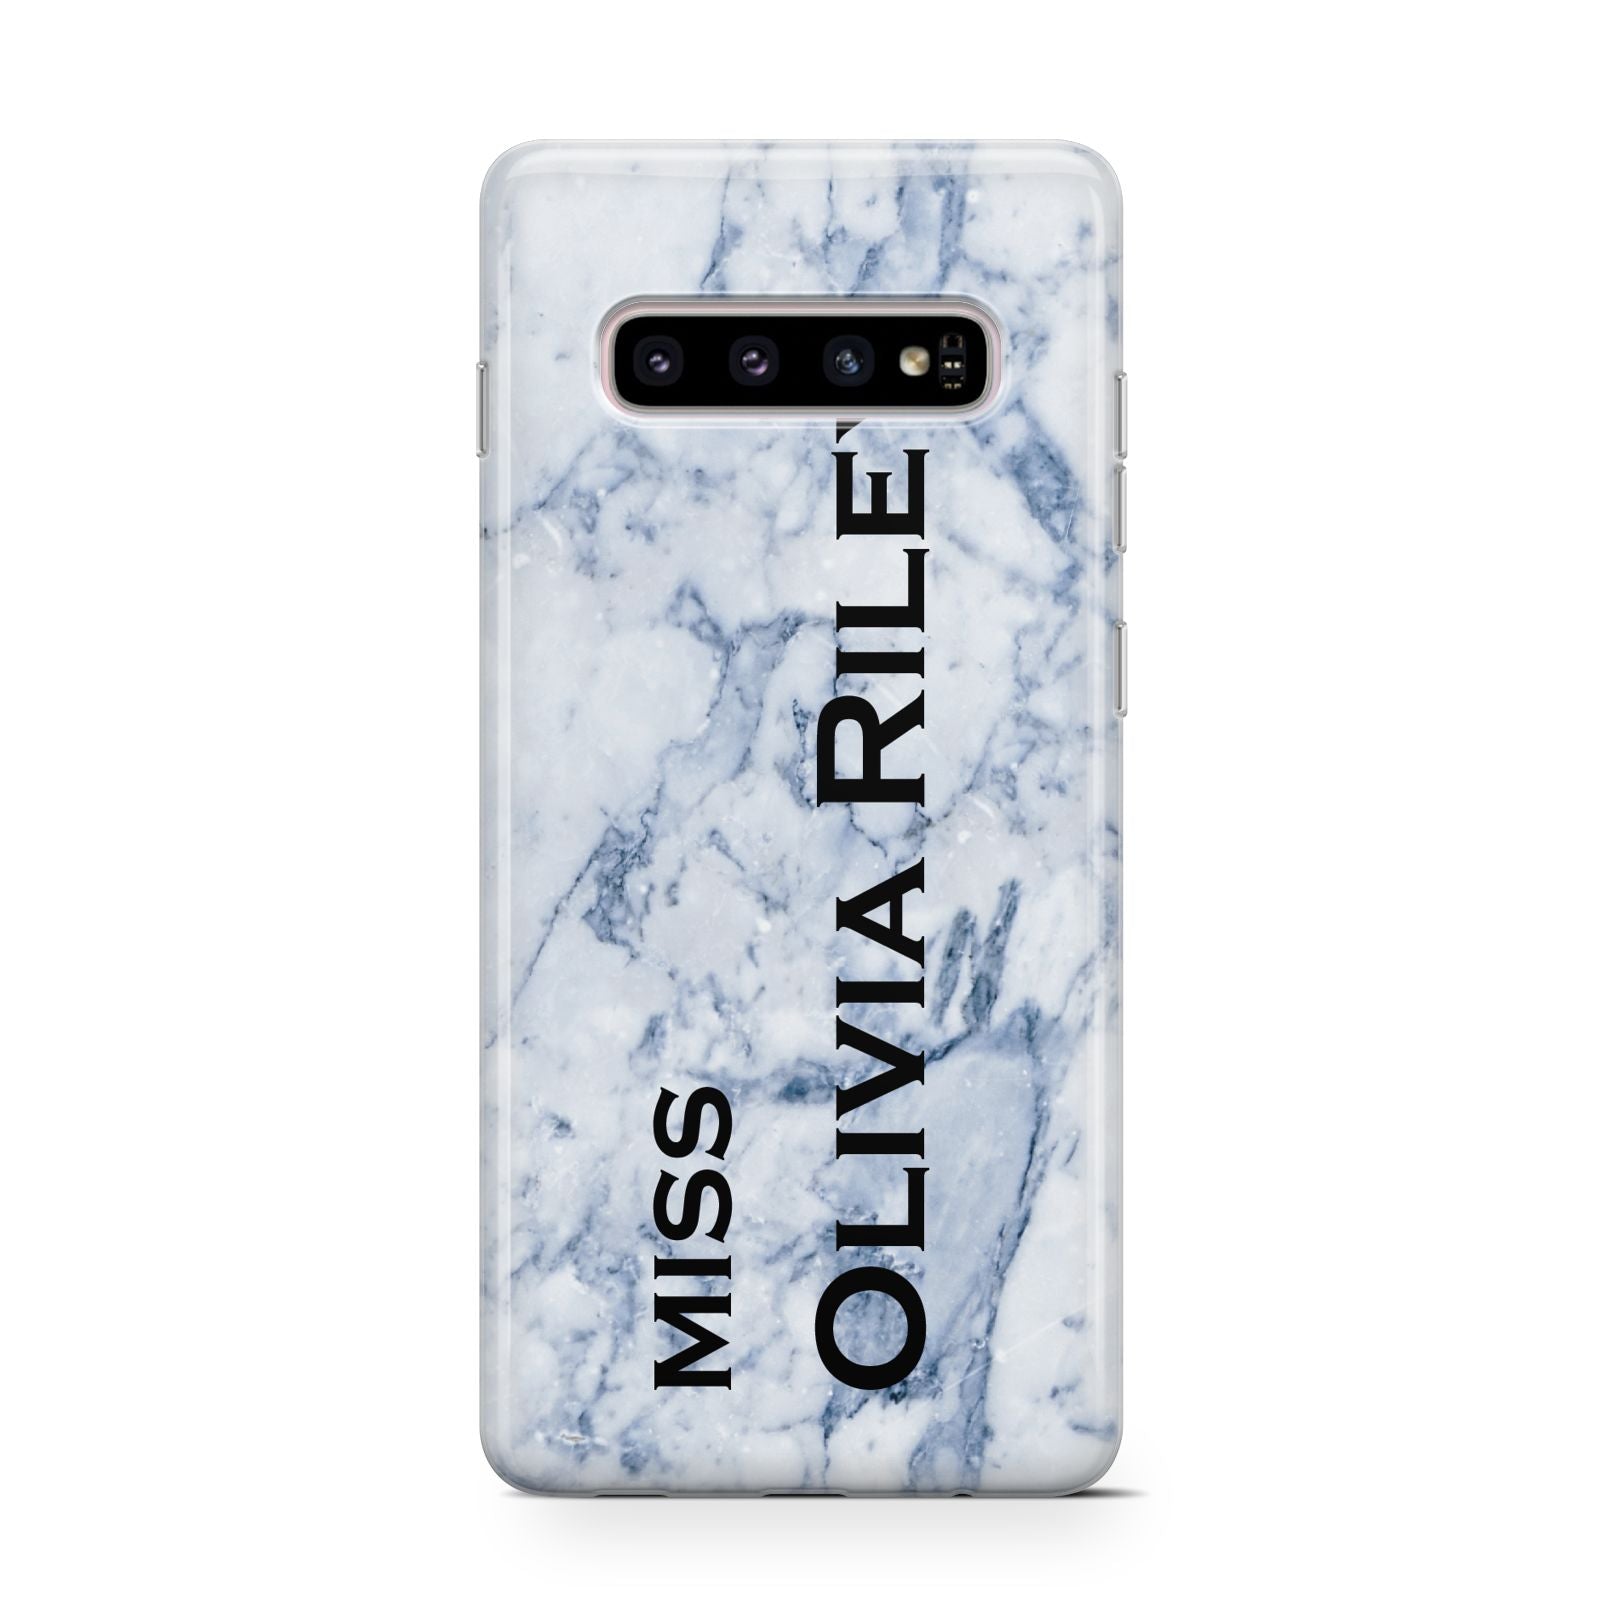 Full Name Grey Marble Samsung Galaxy S10 Case